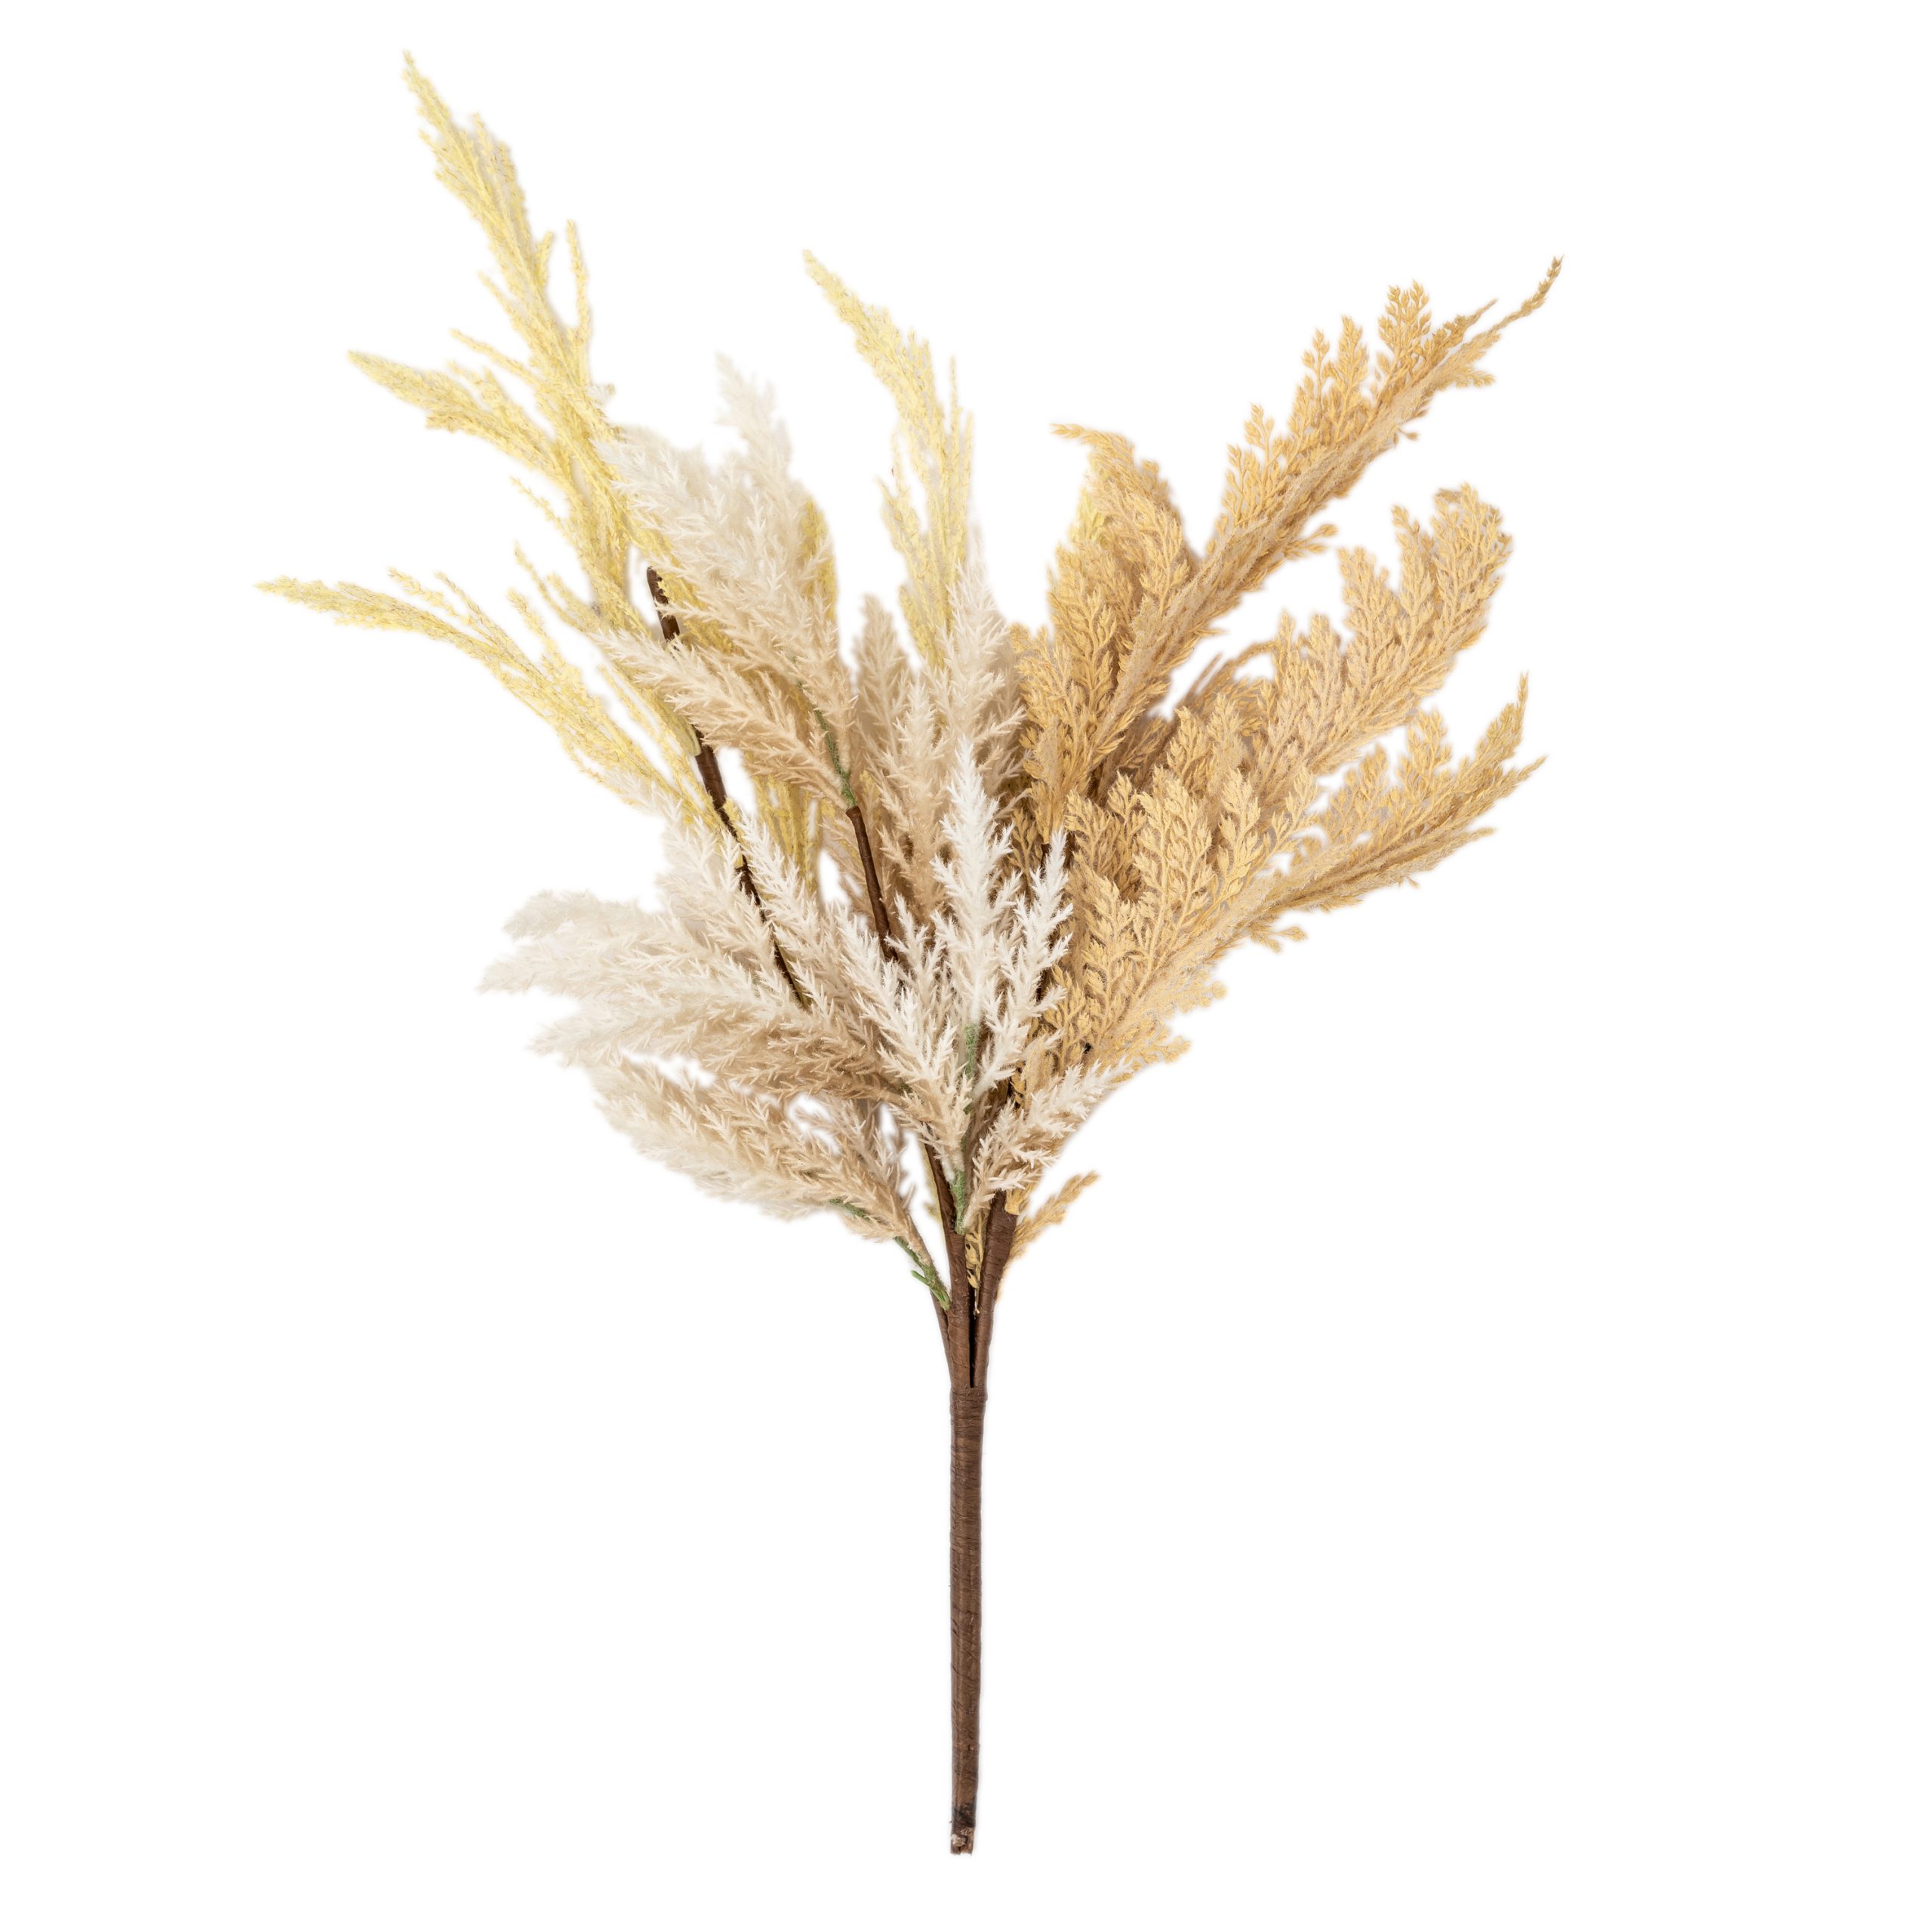 Gallery Direct Dry Grass Bouquet Small